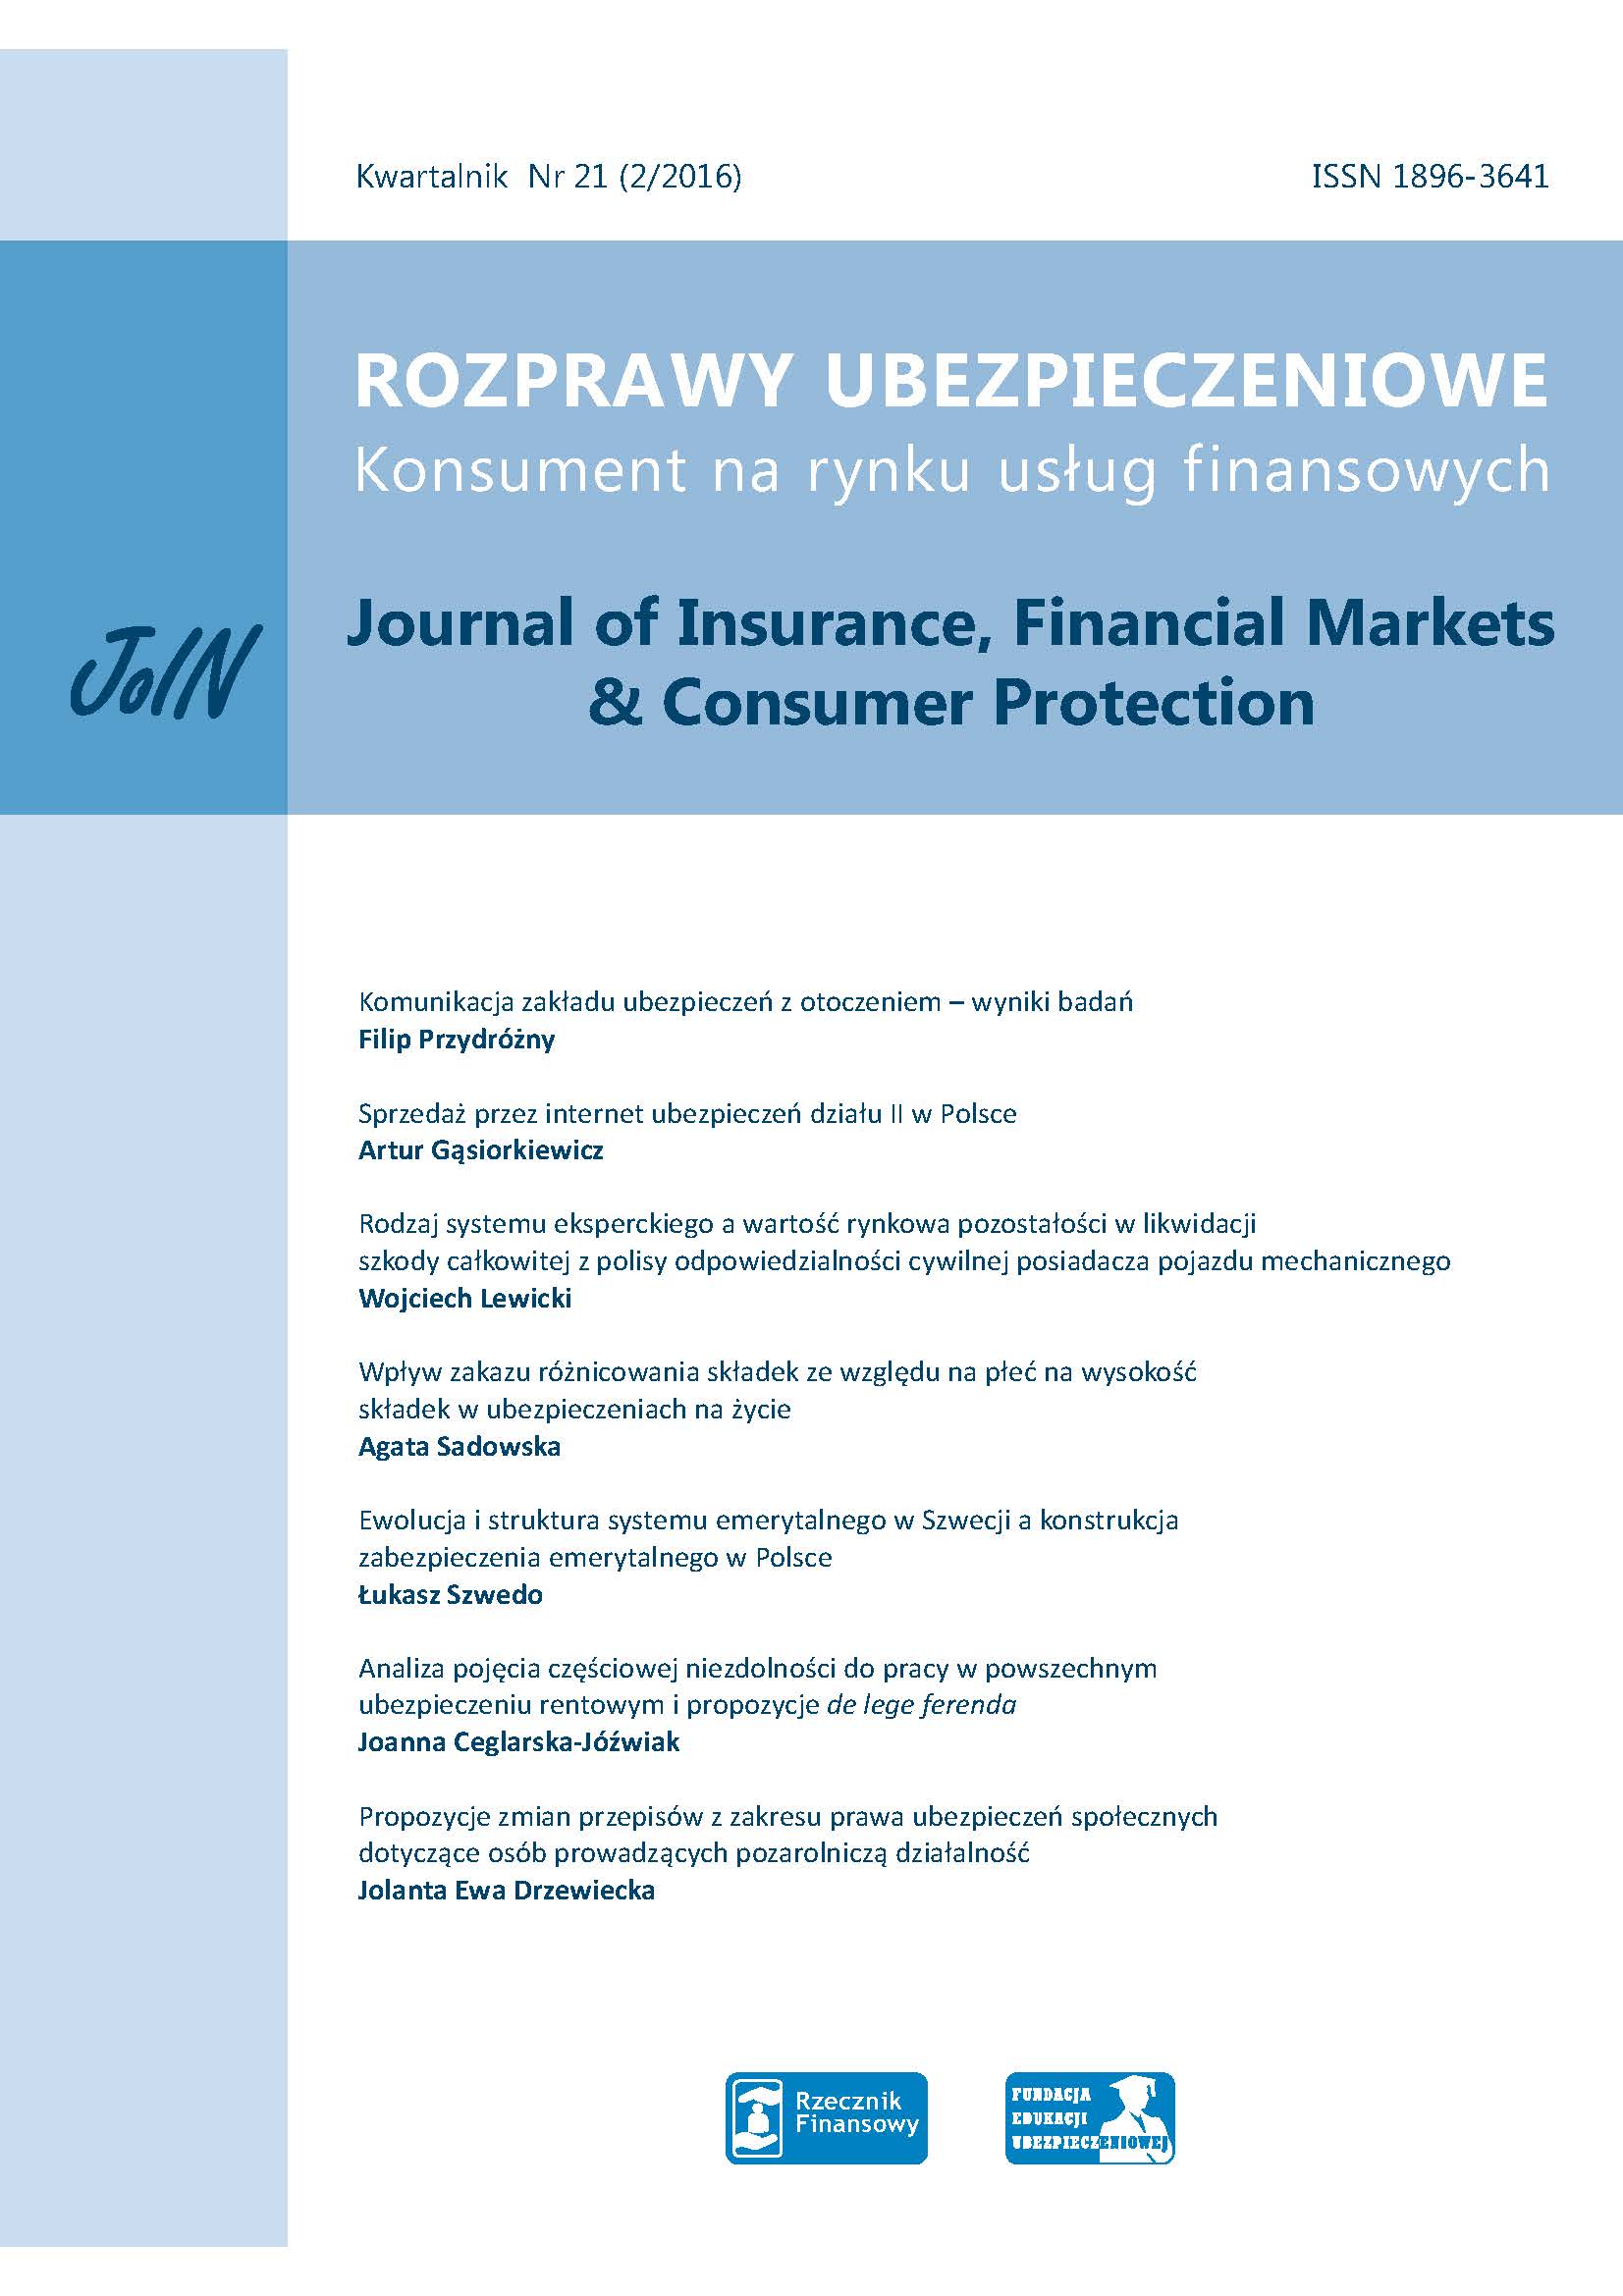 Journal of Insurance, Financial Markets and Consumer Protection